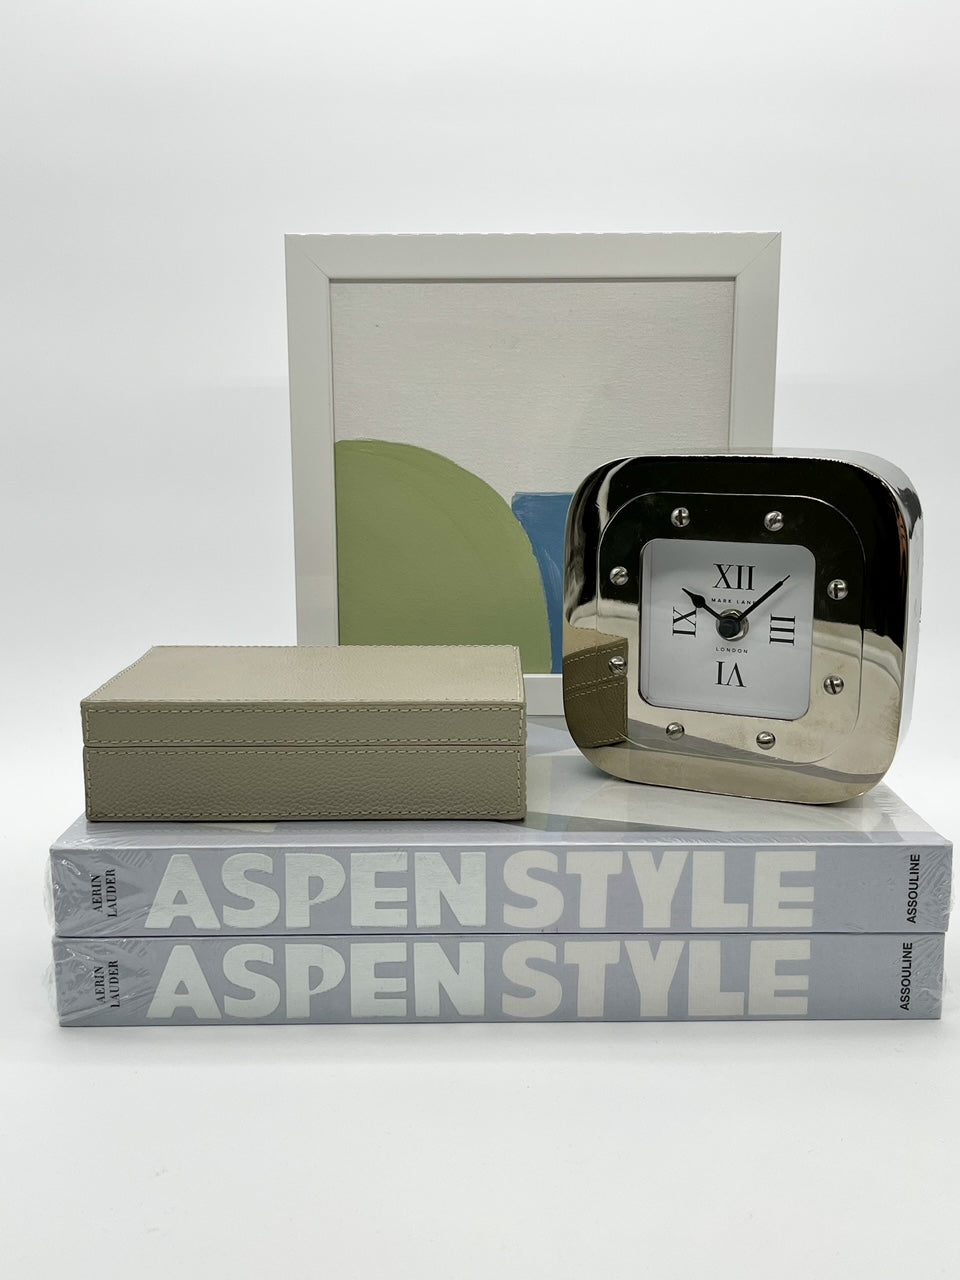 Aspen Style illustrated book with home accents